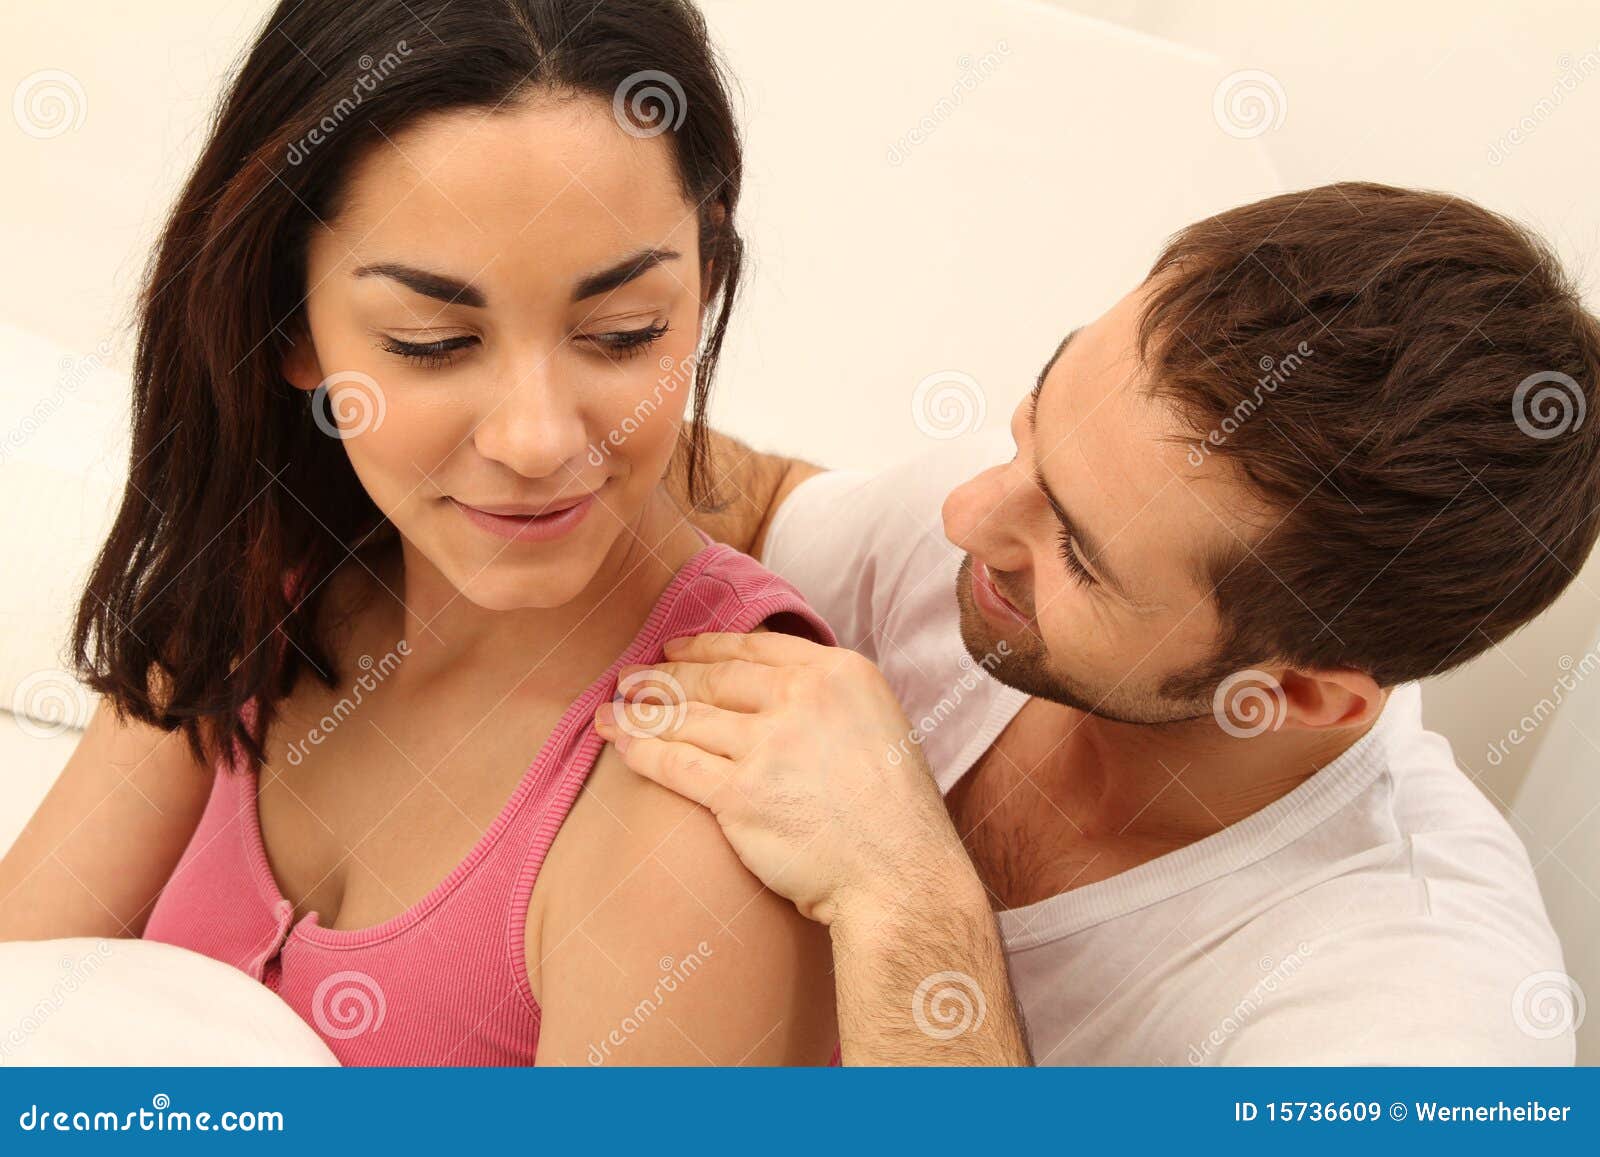 Young man giving a massage stock image